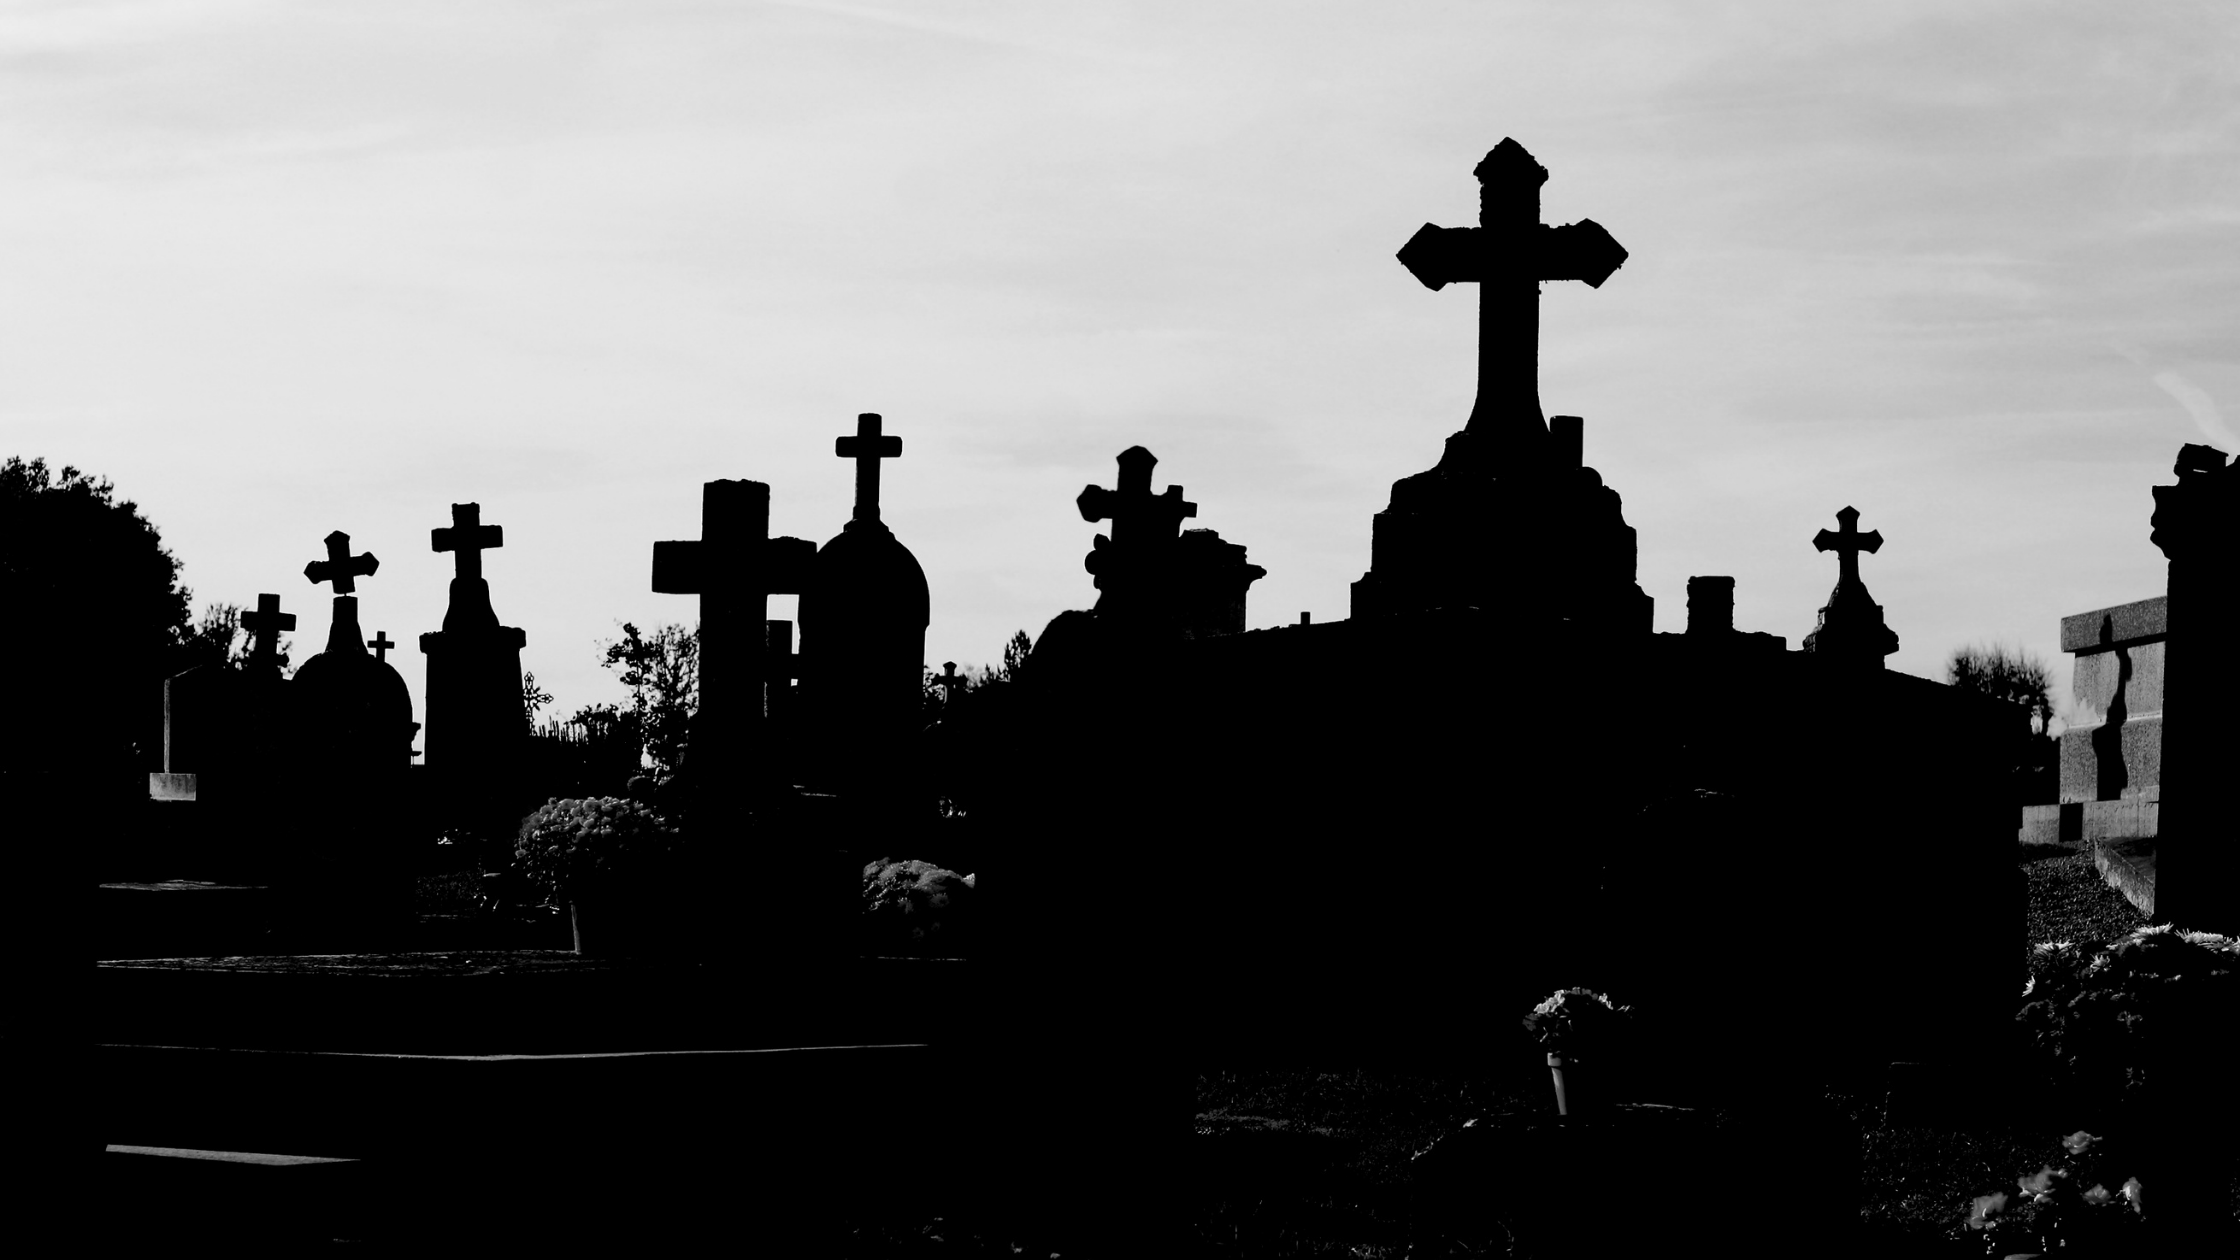 A cemetery, a reminder of death